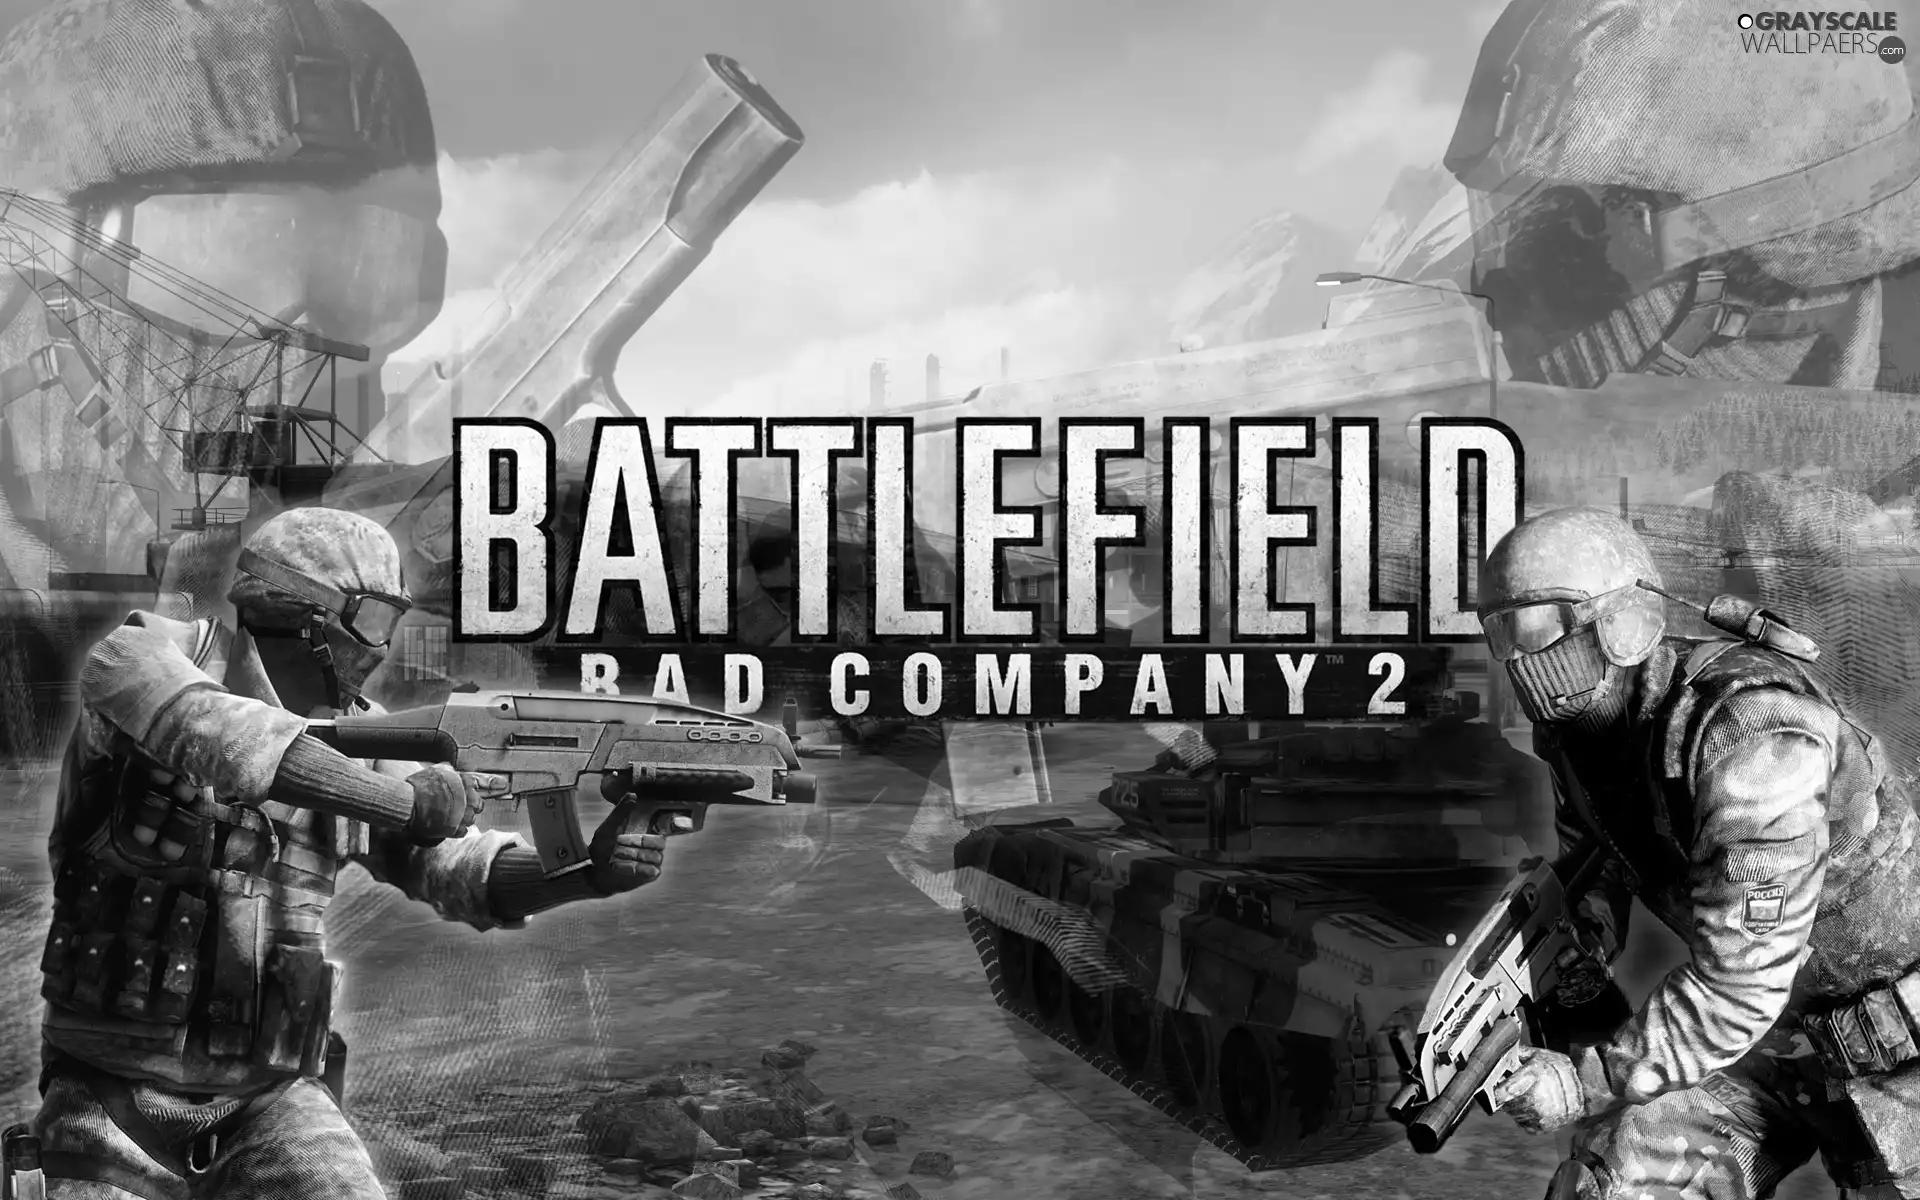 Battlefield Bad Company 2, game, PS3